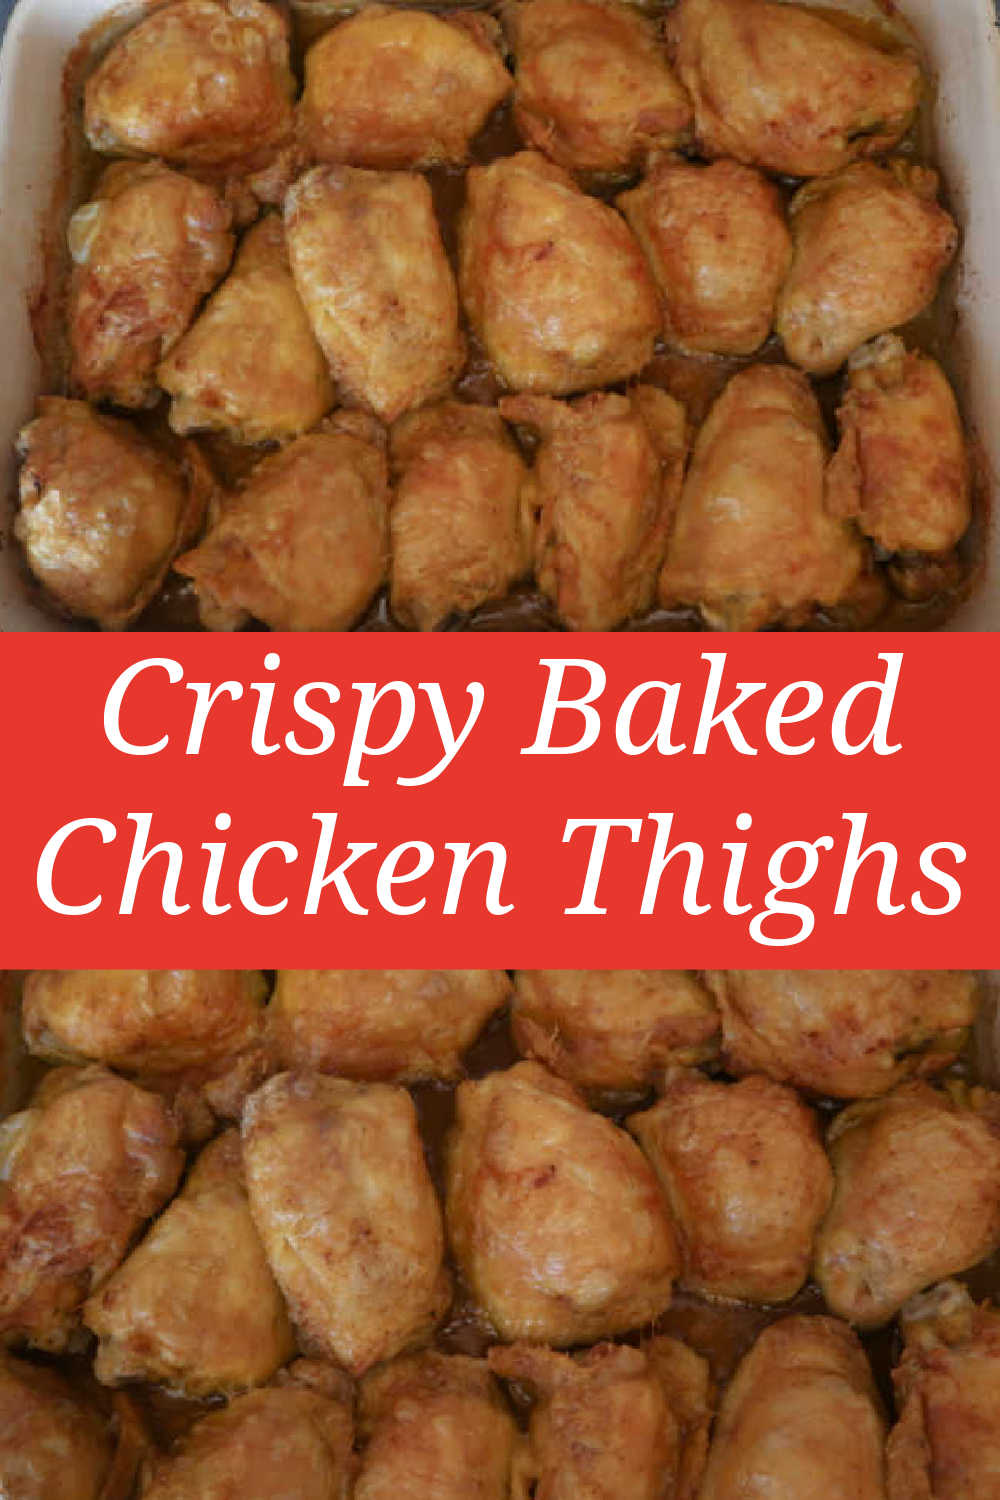 Oven Baked Chicken Thighs Recipe - the best easy and crispy chicken thigh meal - with the full video tutorial.